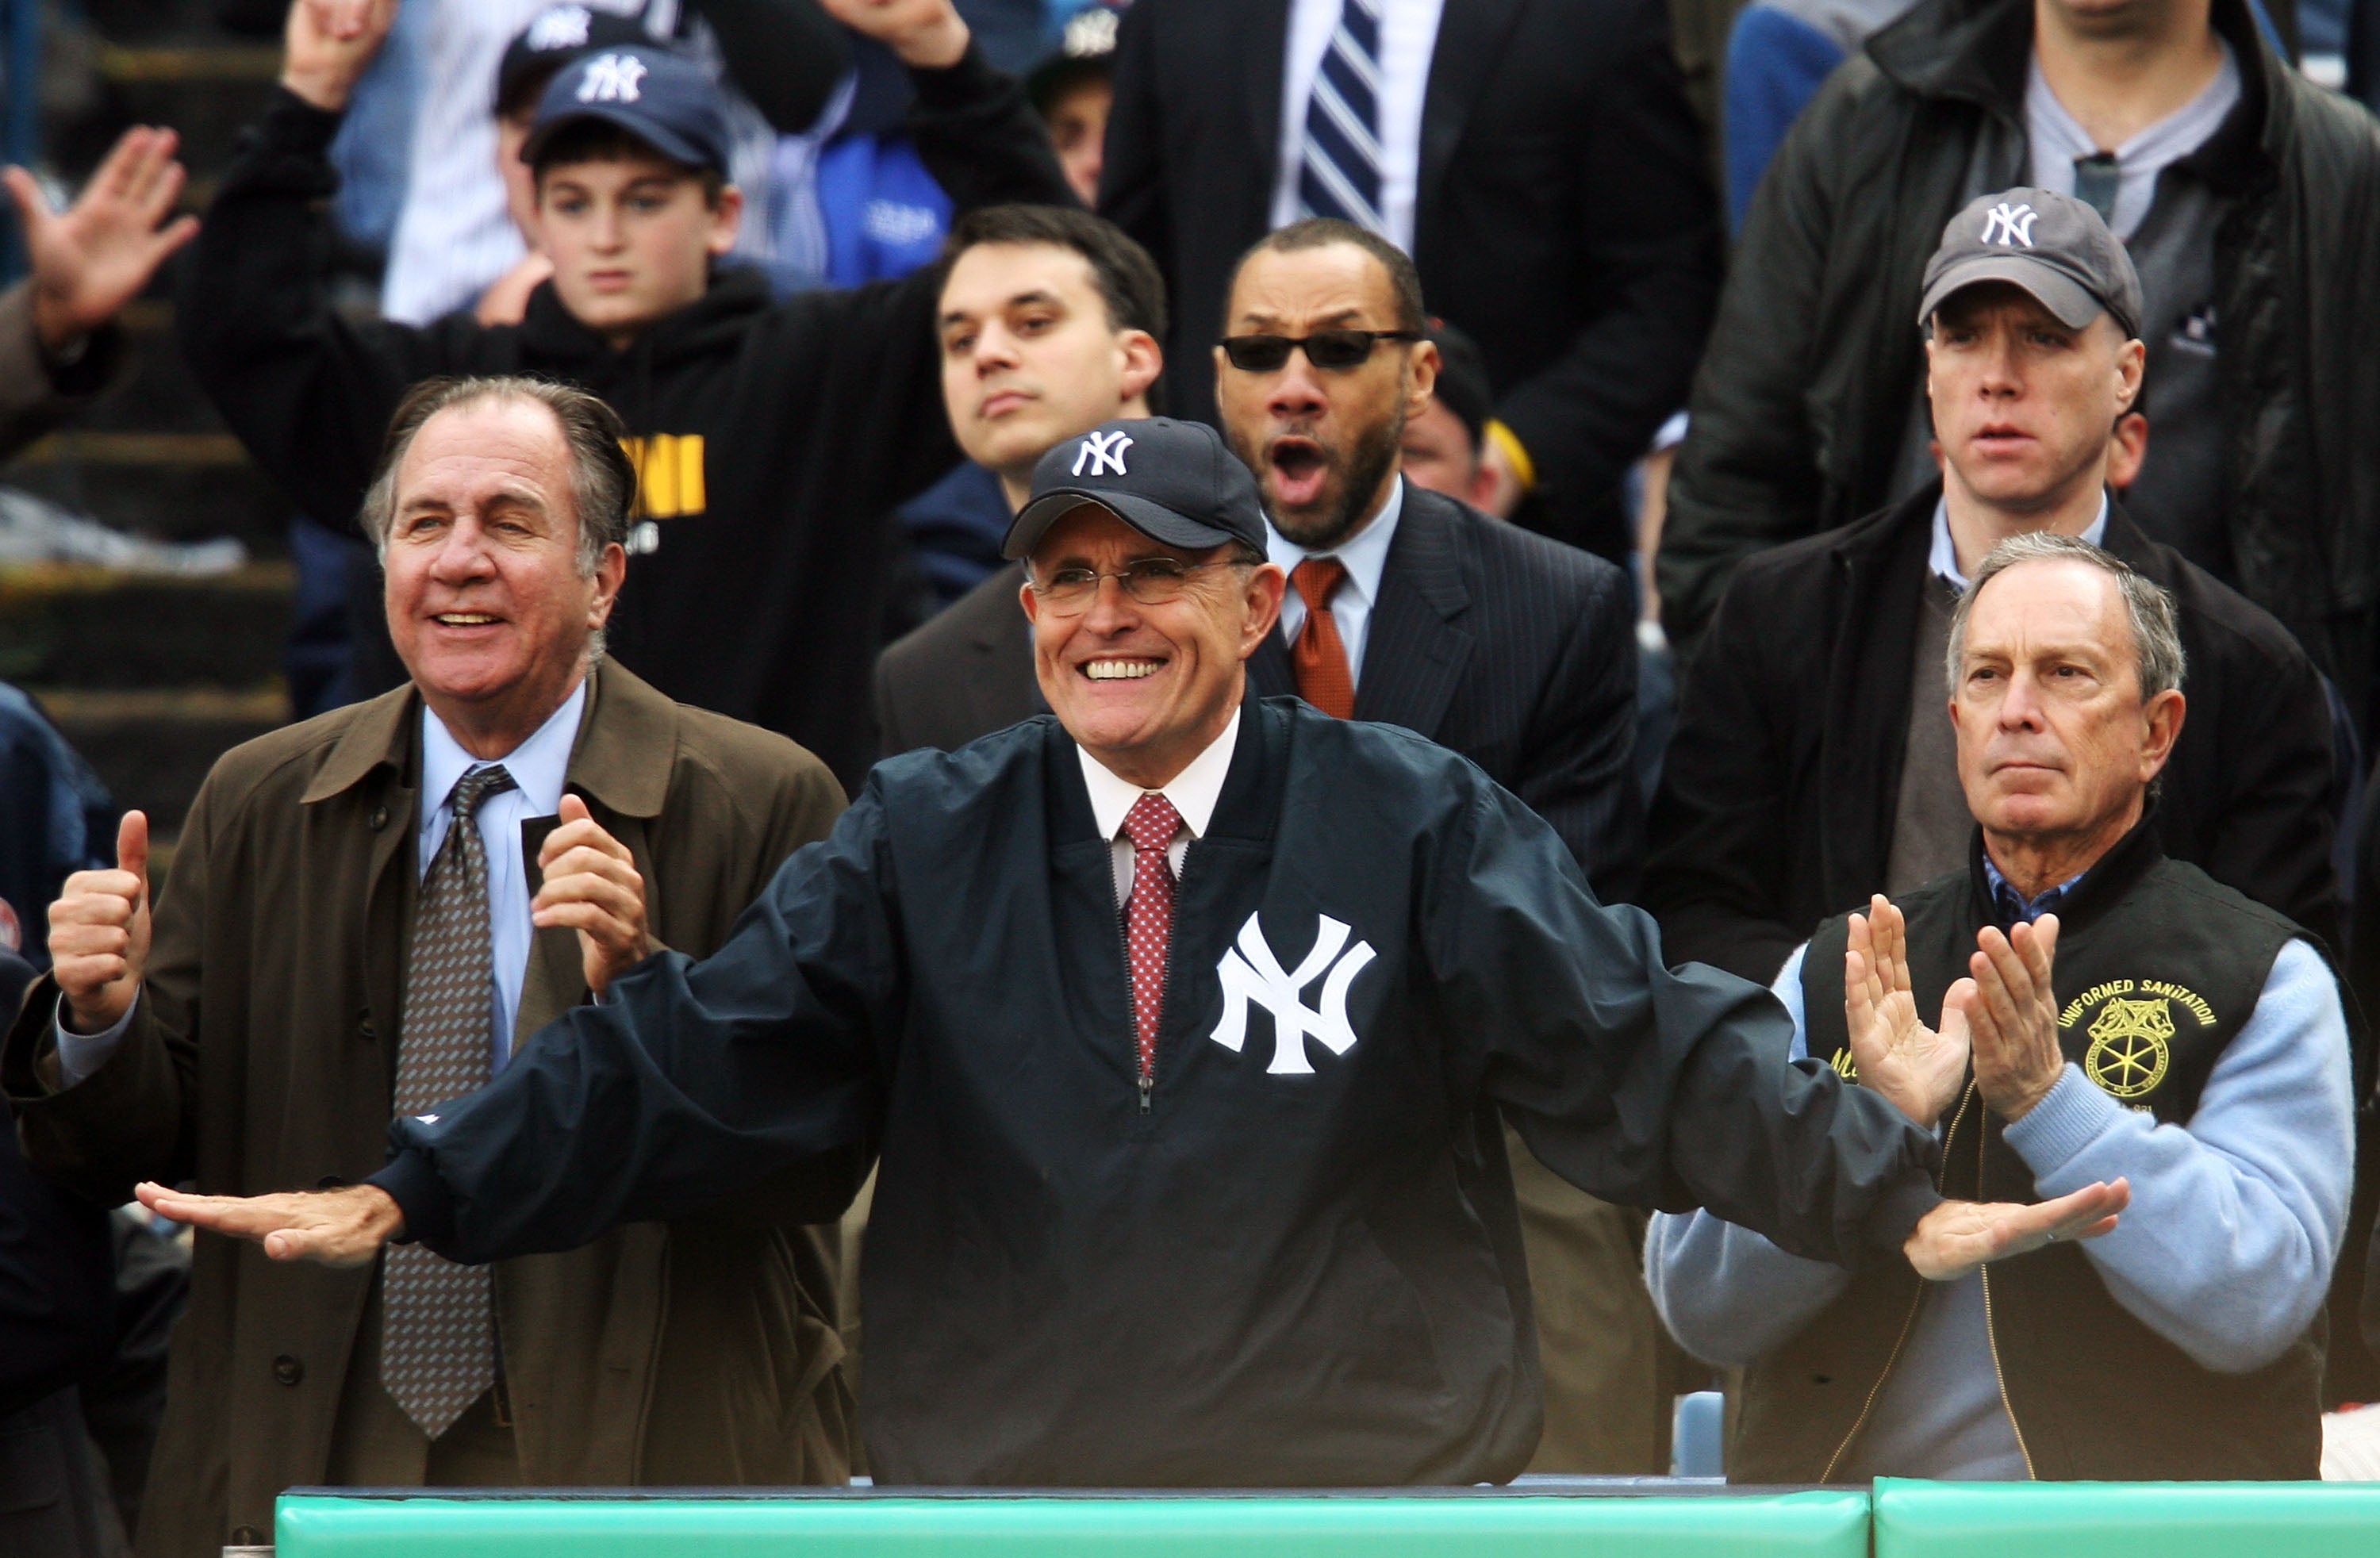 giuliani’s bankruptcy could cost him his apartment, his jewellery and, perhaps worse, his joe dimaggio shirt